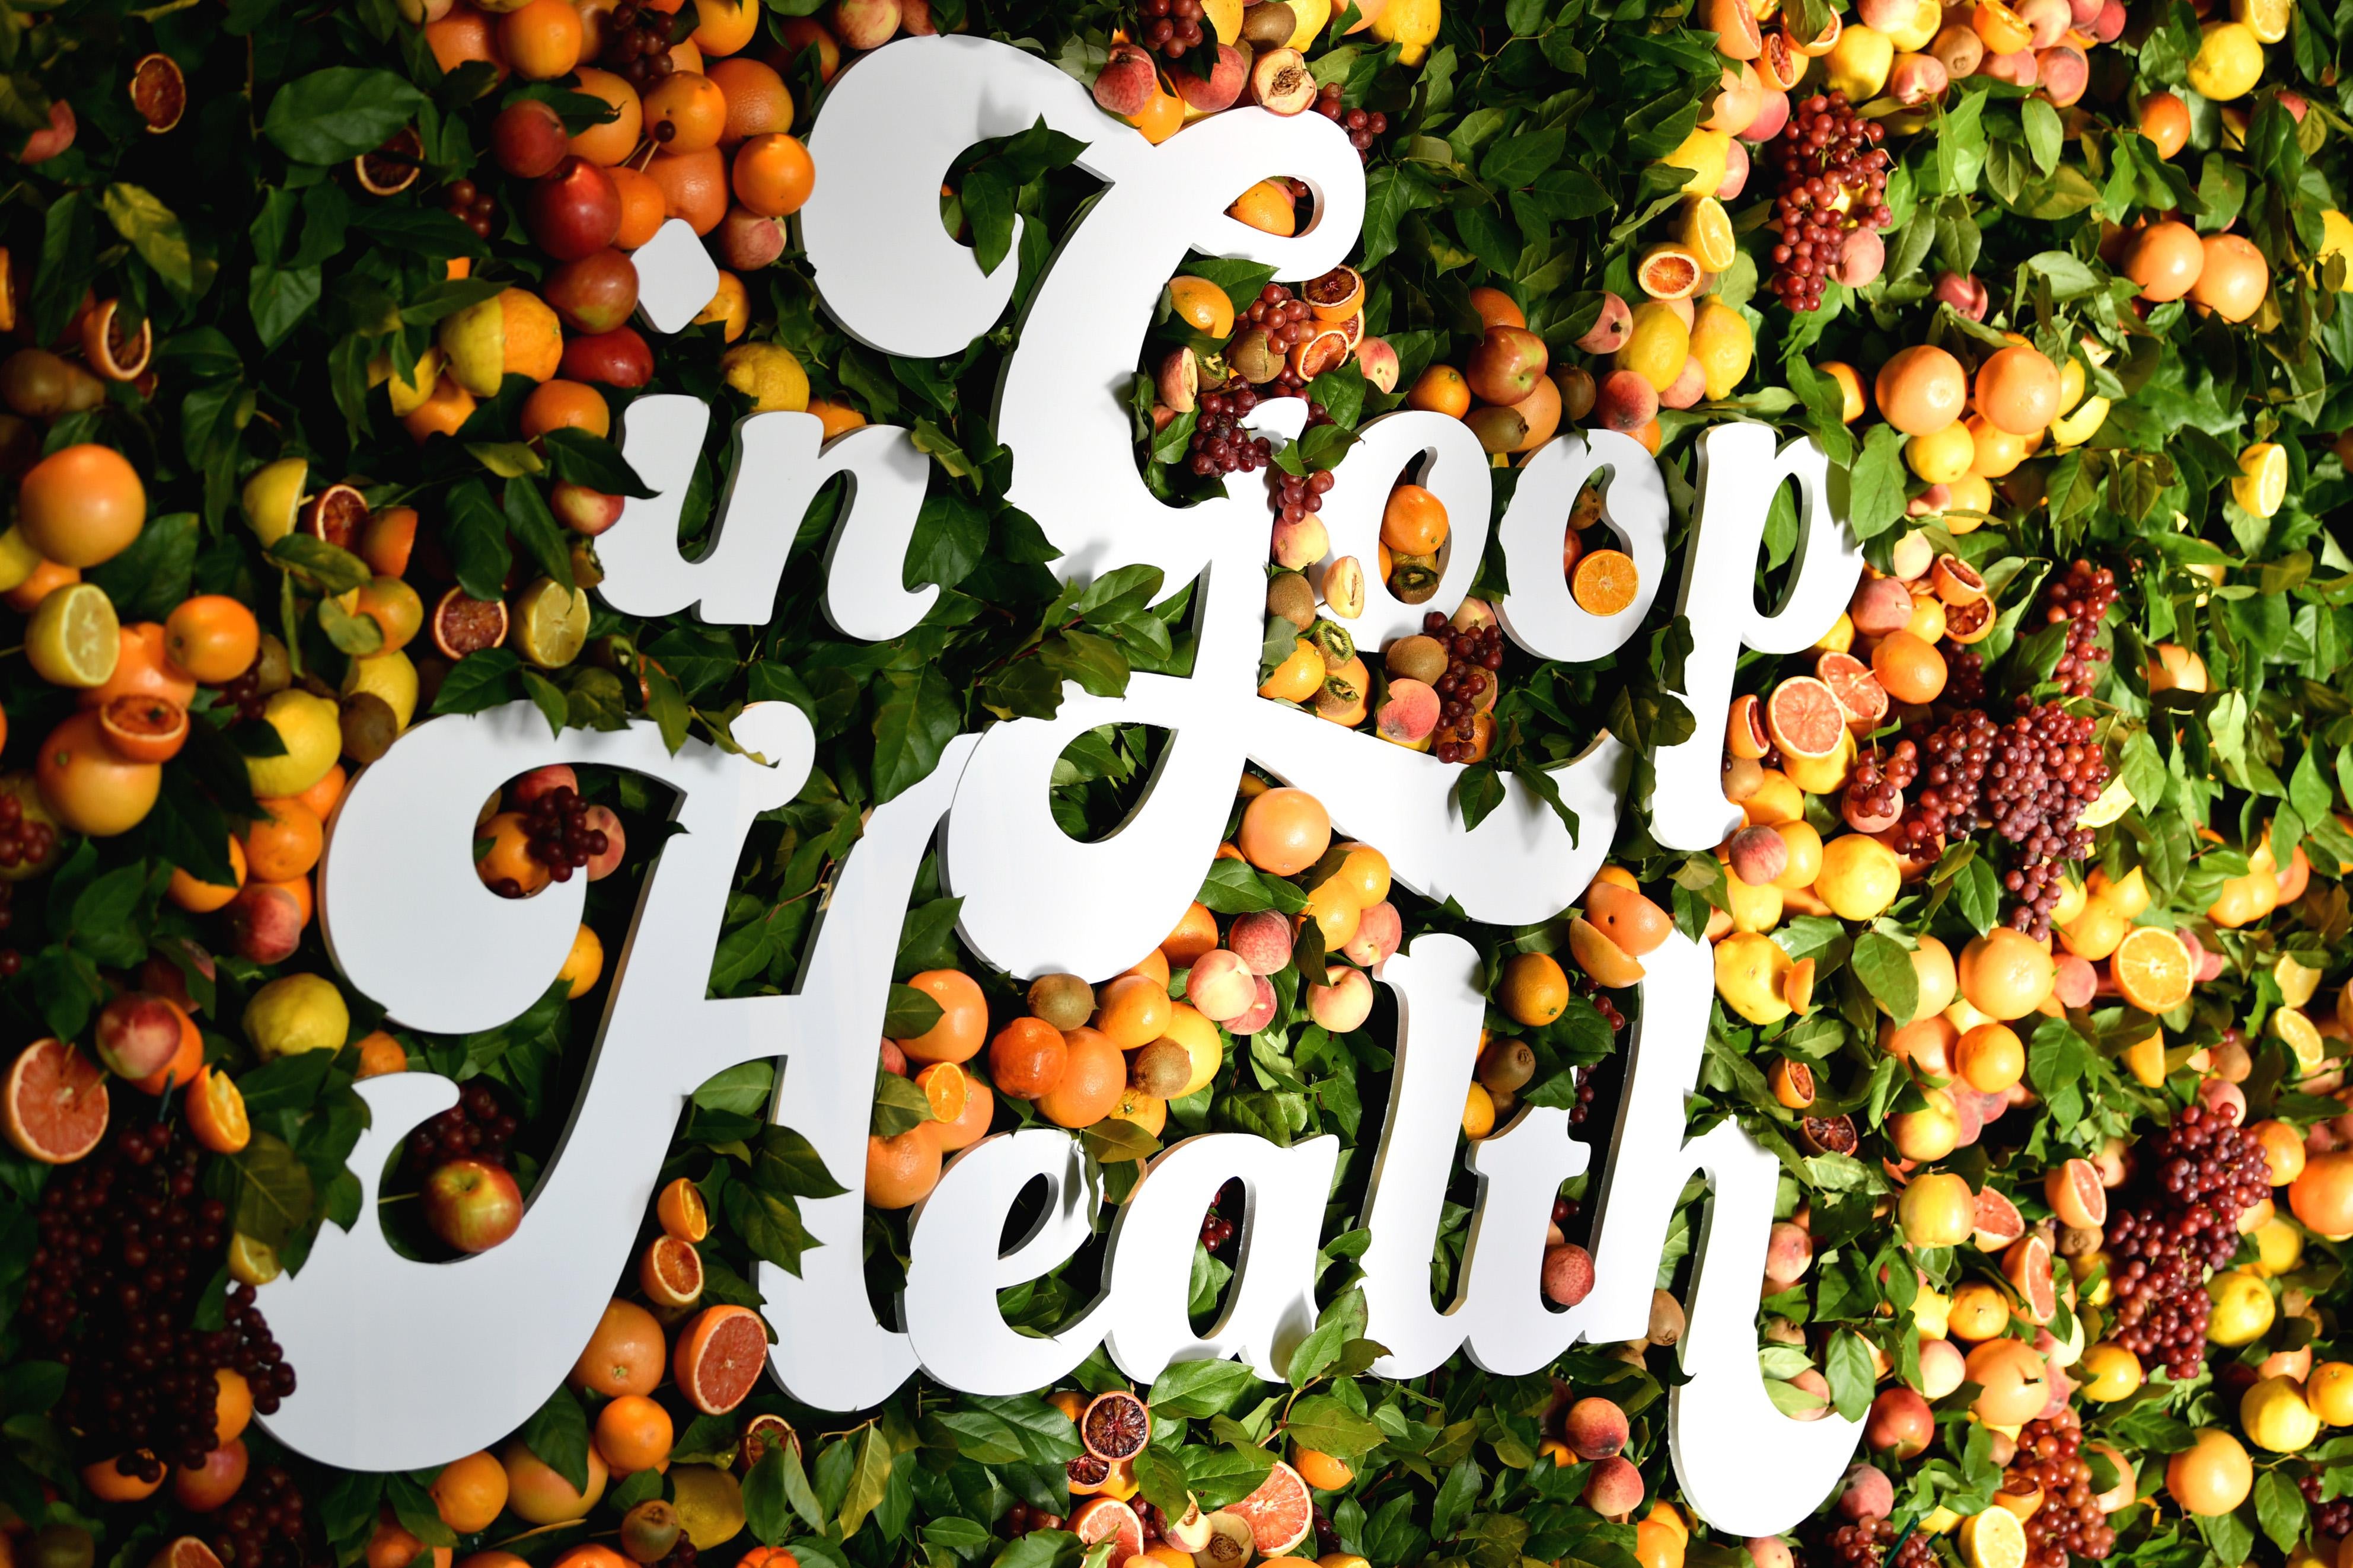 "In Goop Health" is spelled out in white letters against a floral backdrop.